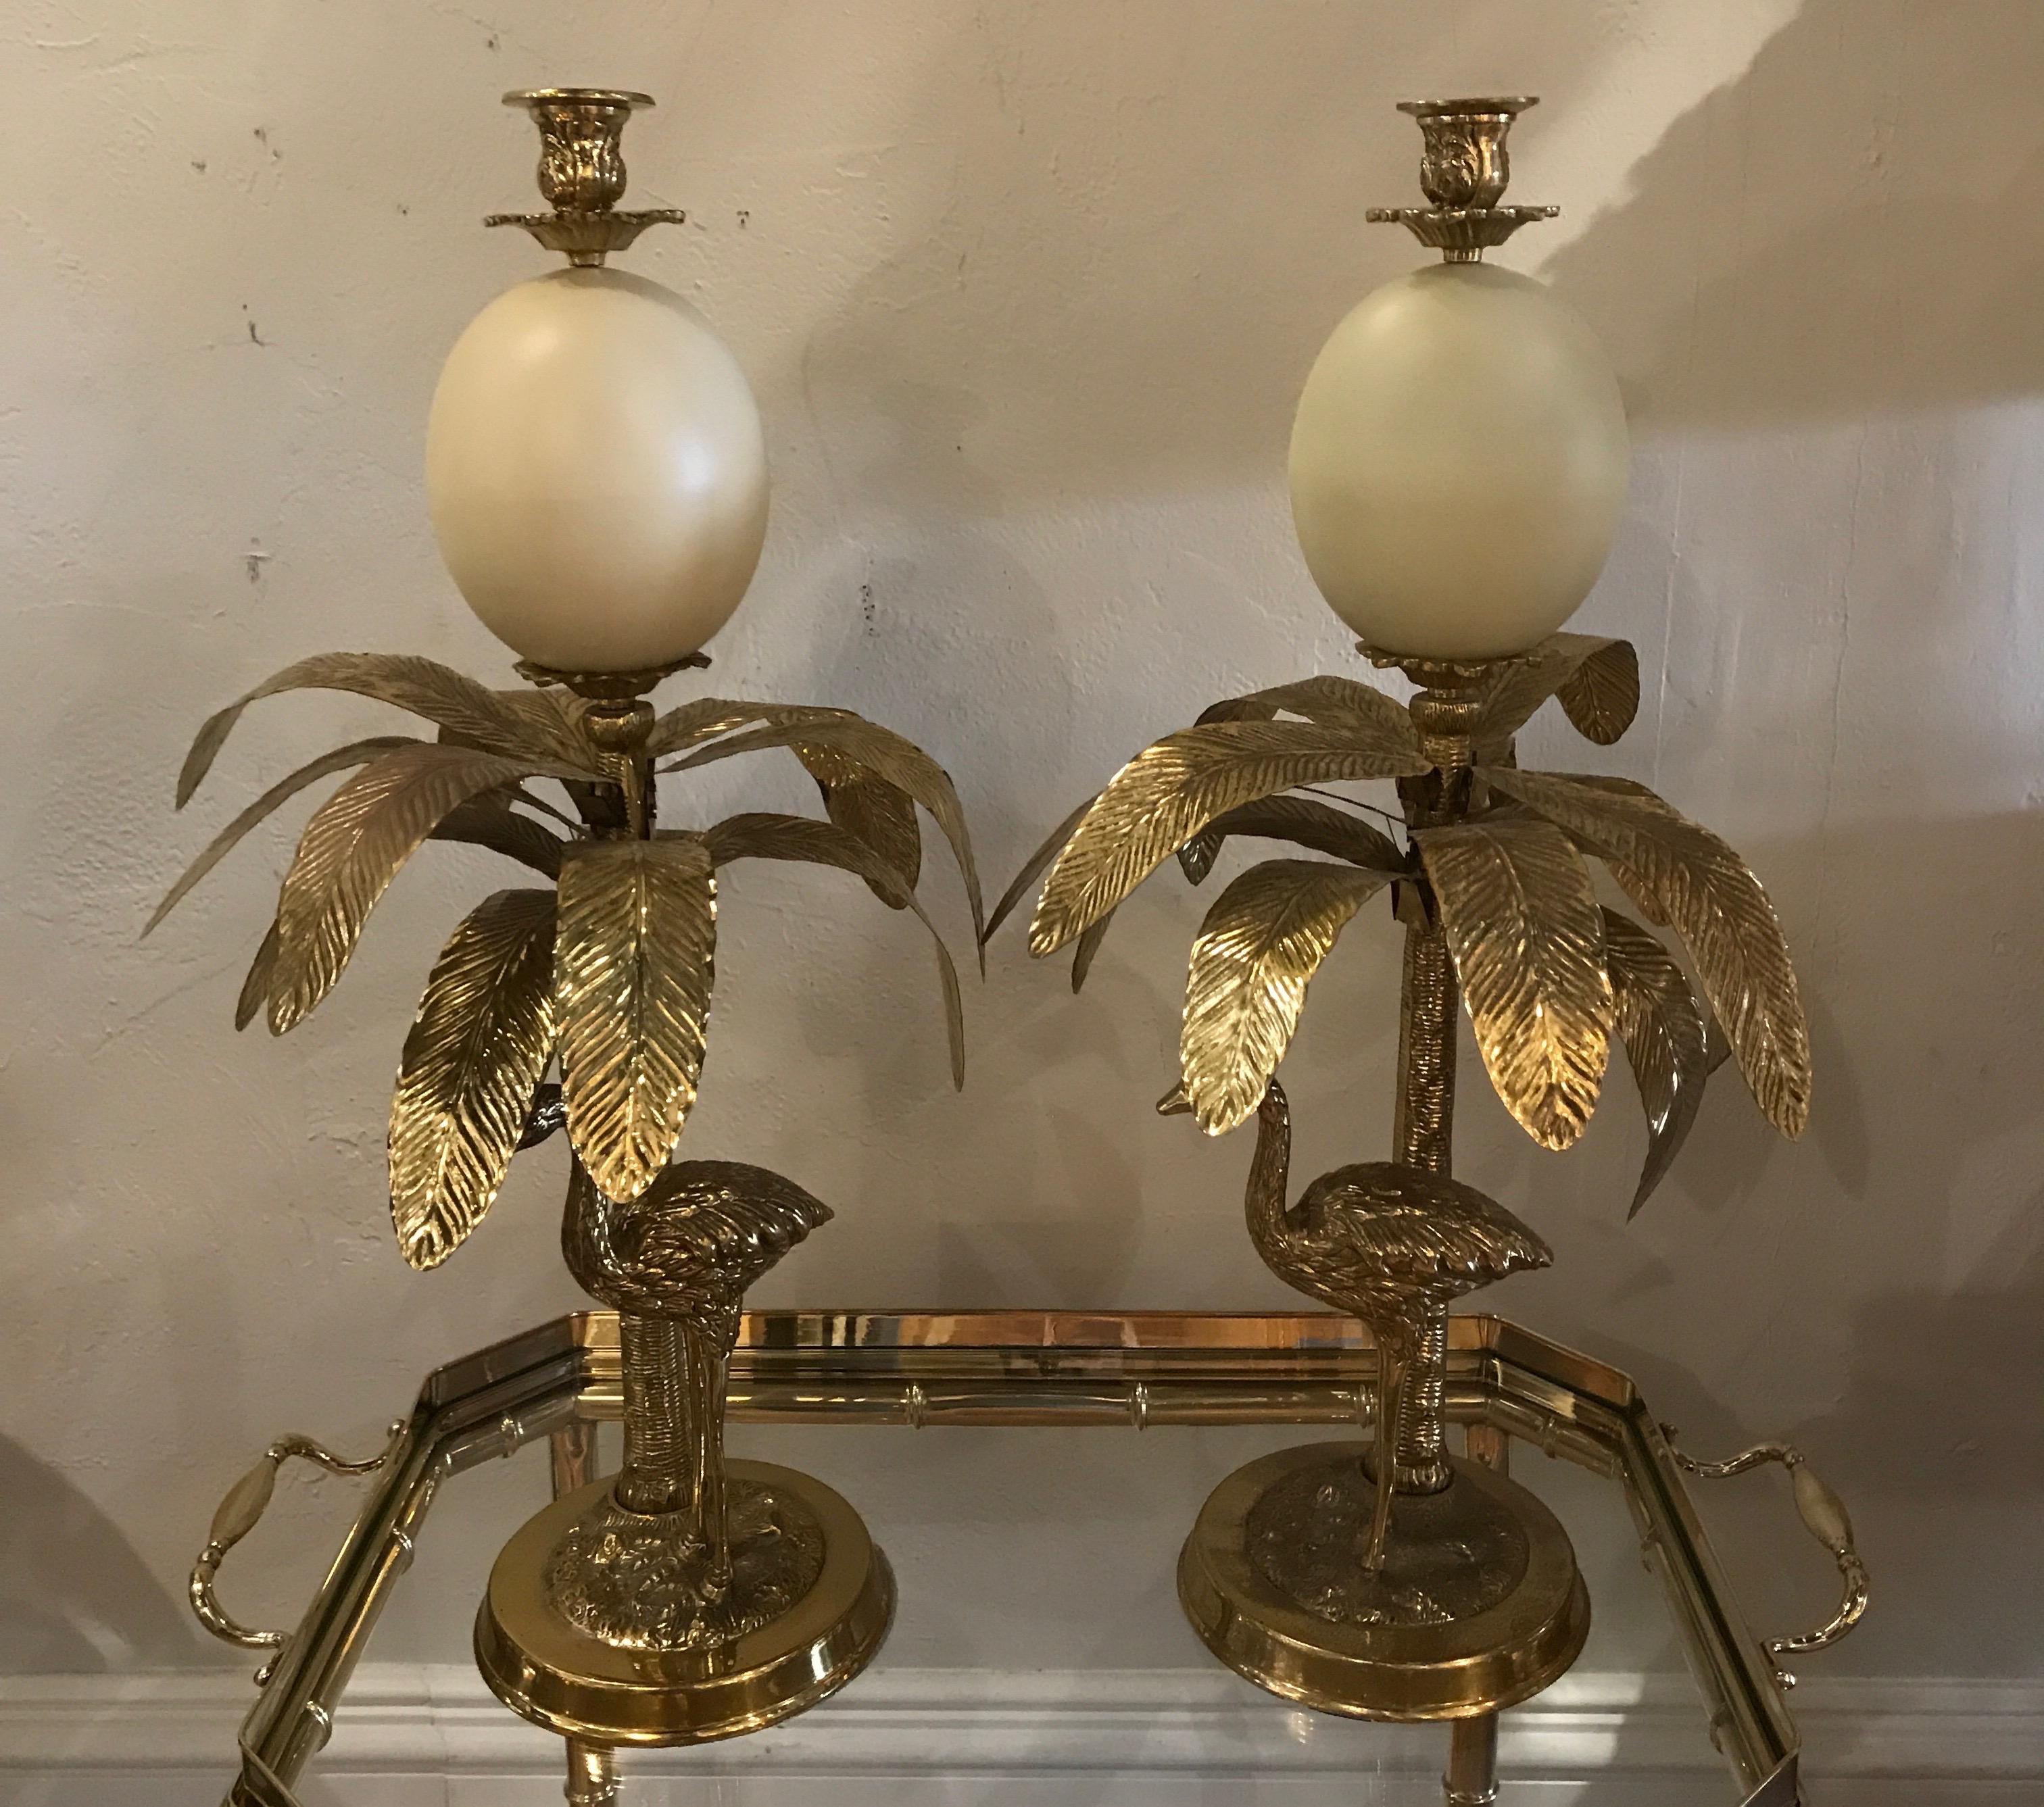 Pair of faux ostrich egg, ostrich & palm tree brass candlesticks in the Hollywood Regency style.